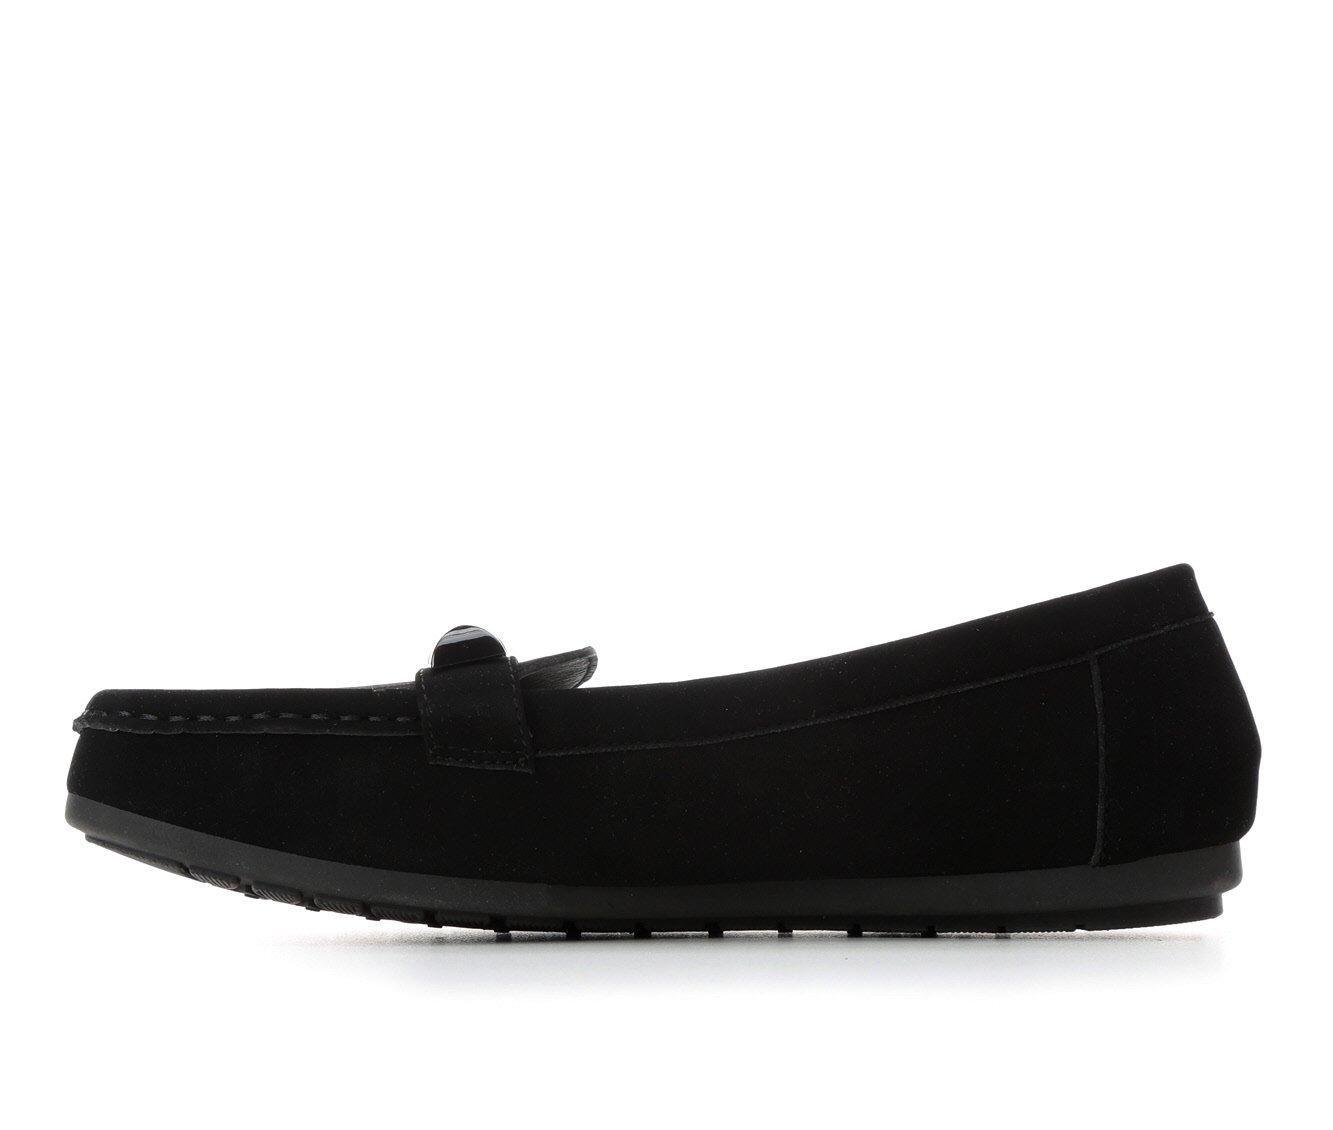 Women's Daisy Fuentes Dasia Loafers